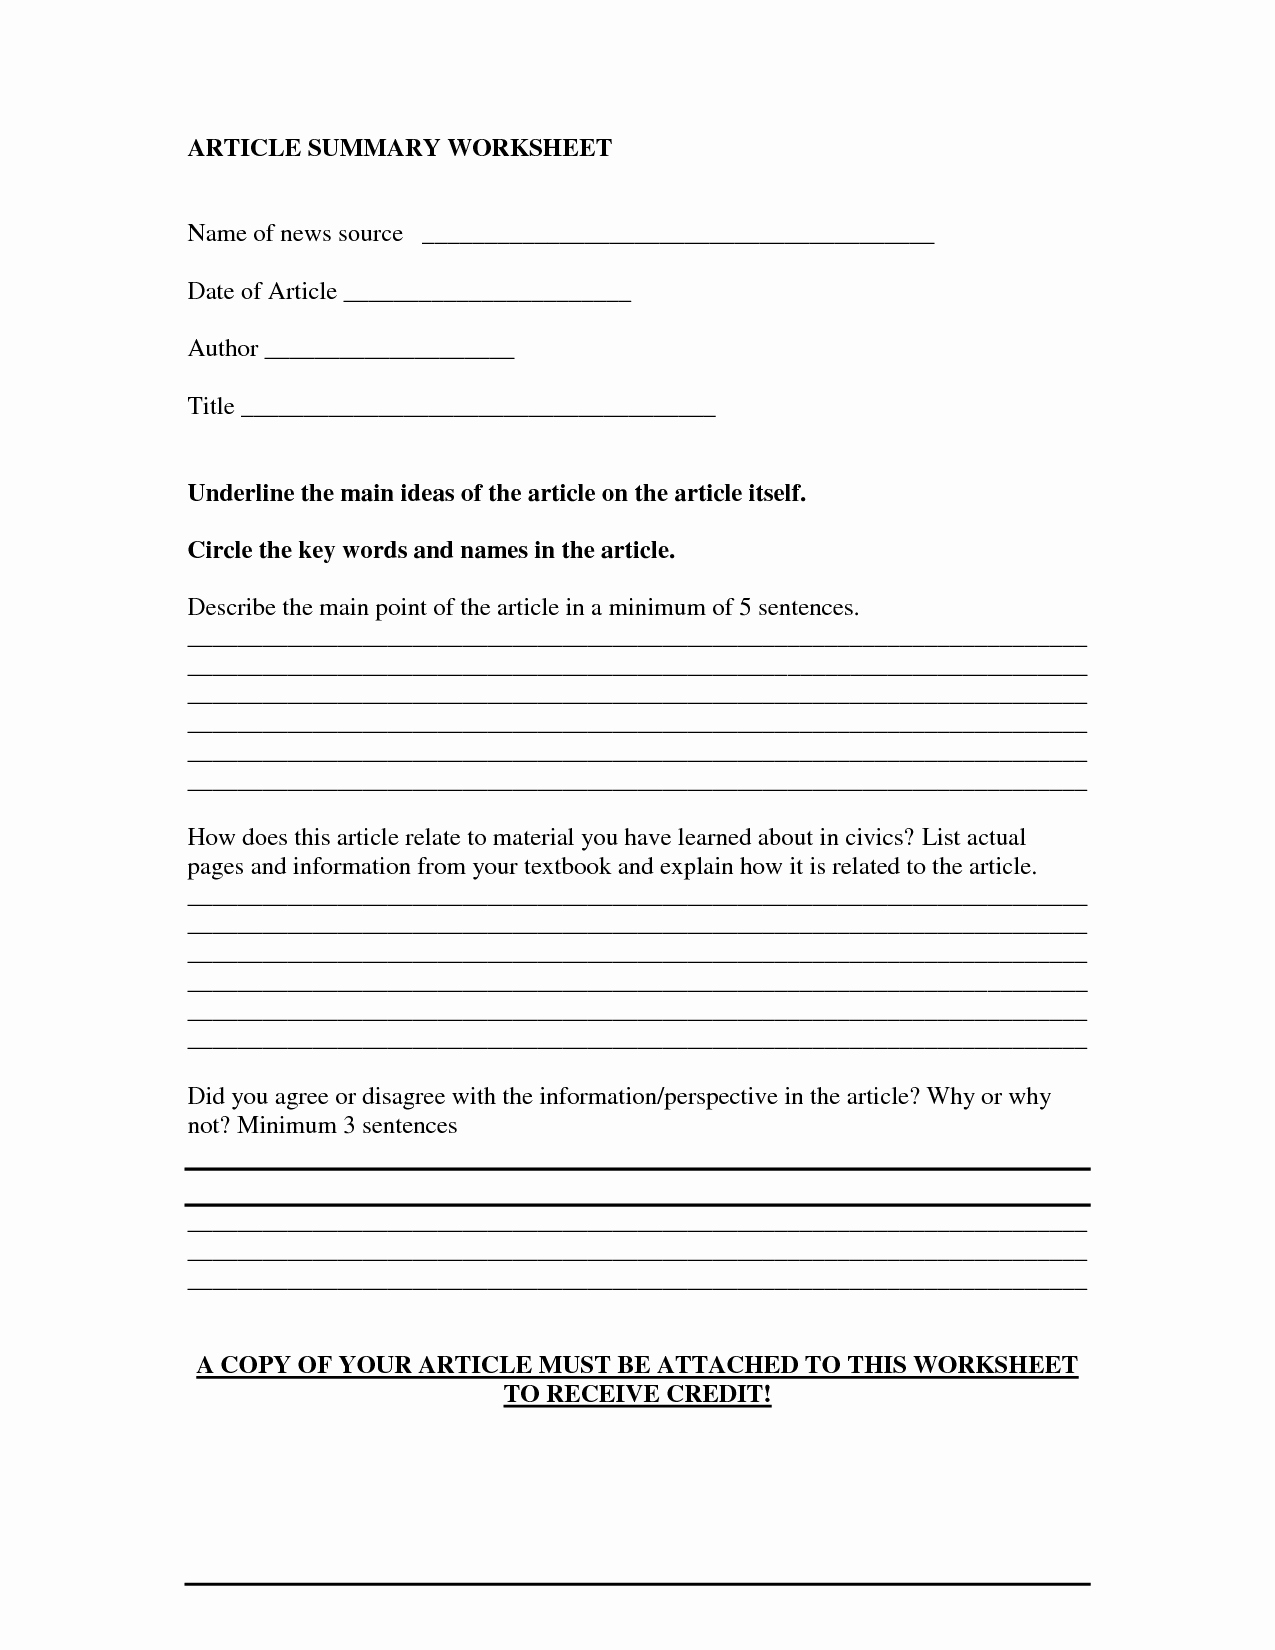 Contract Summary Template Awesome Science Article Summary Worksheets